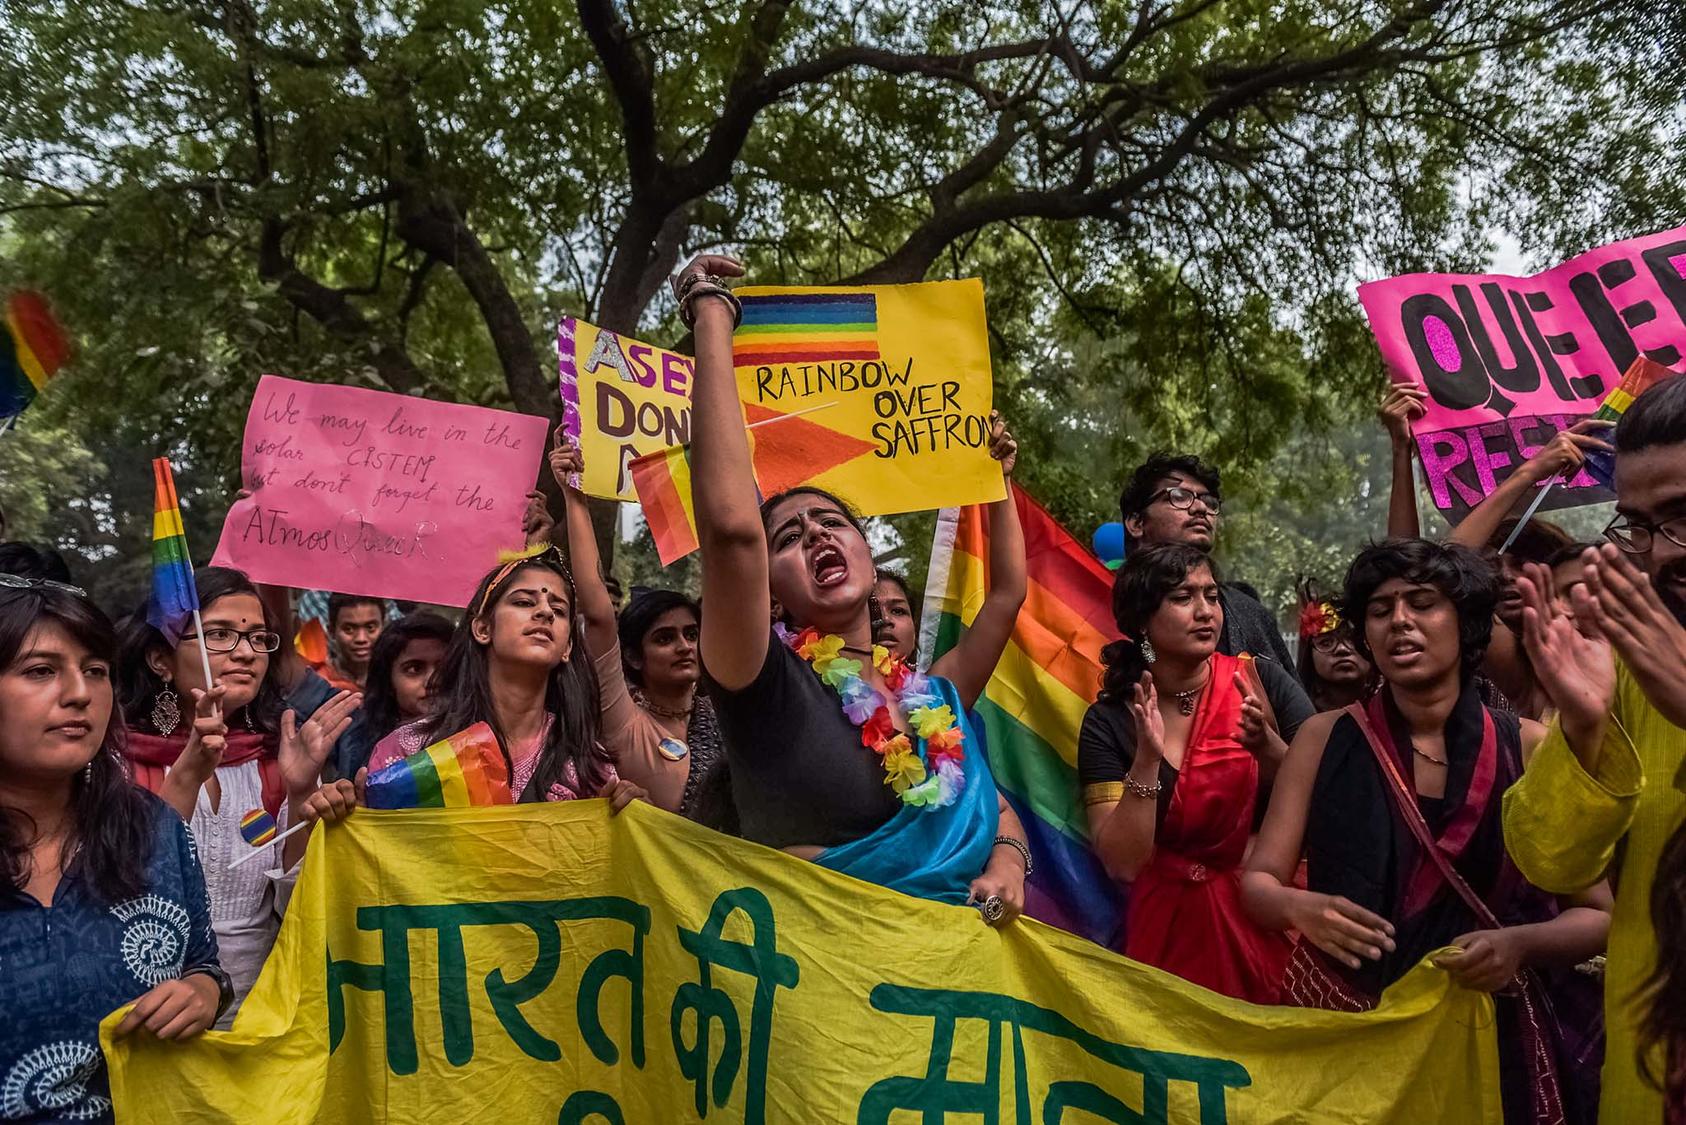 Thousands of supporters of gay and transgender rights march in New Delhi, India, Nov. 12, 2017. (Rebecca Conway/The New York Times)